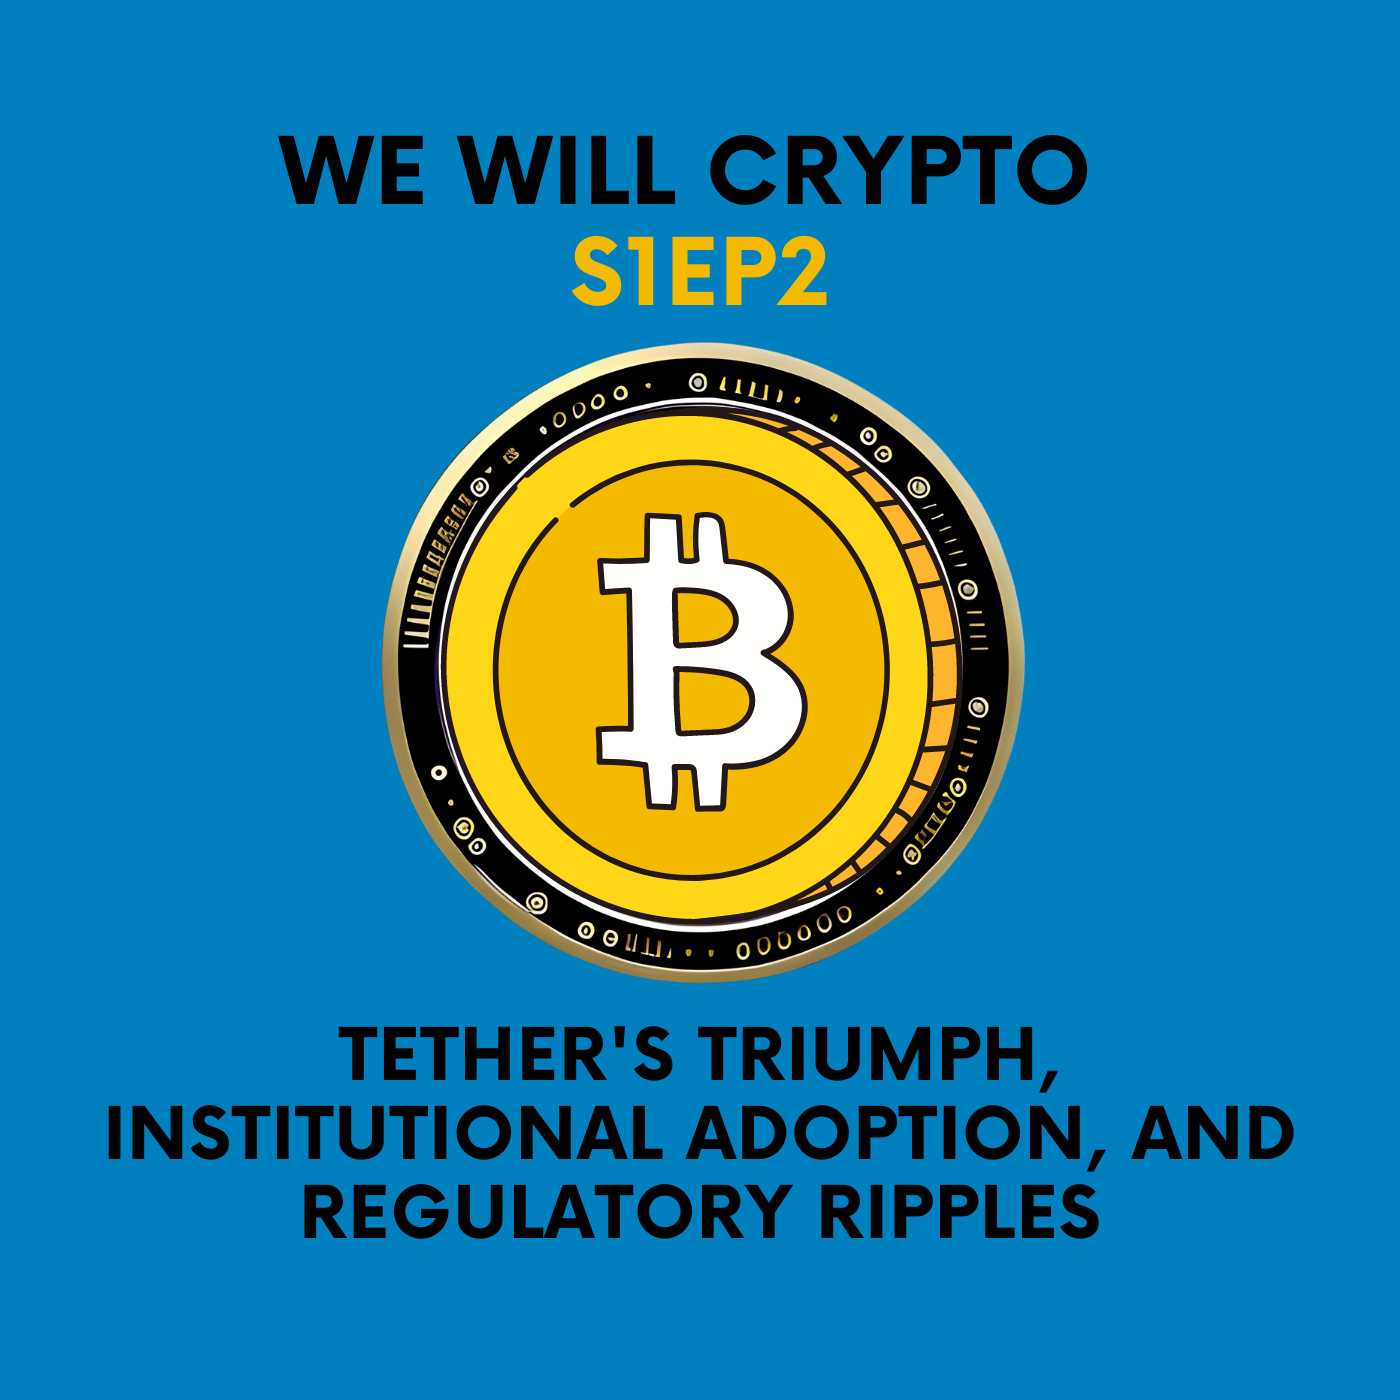 Tether's Triumph, Institutional Adoption, and Regulatory Ripples | S1 EP2 | We Will Crypto